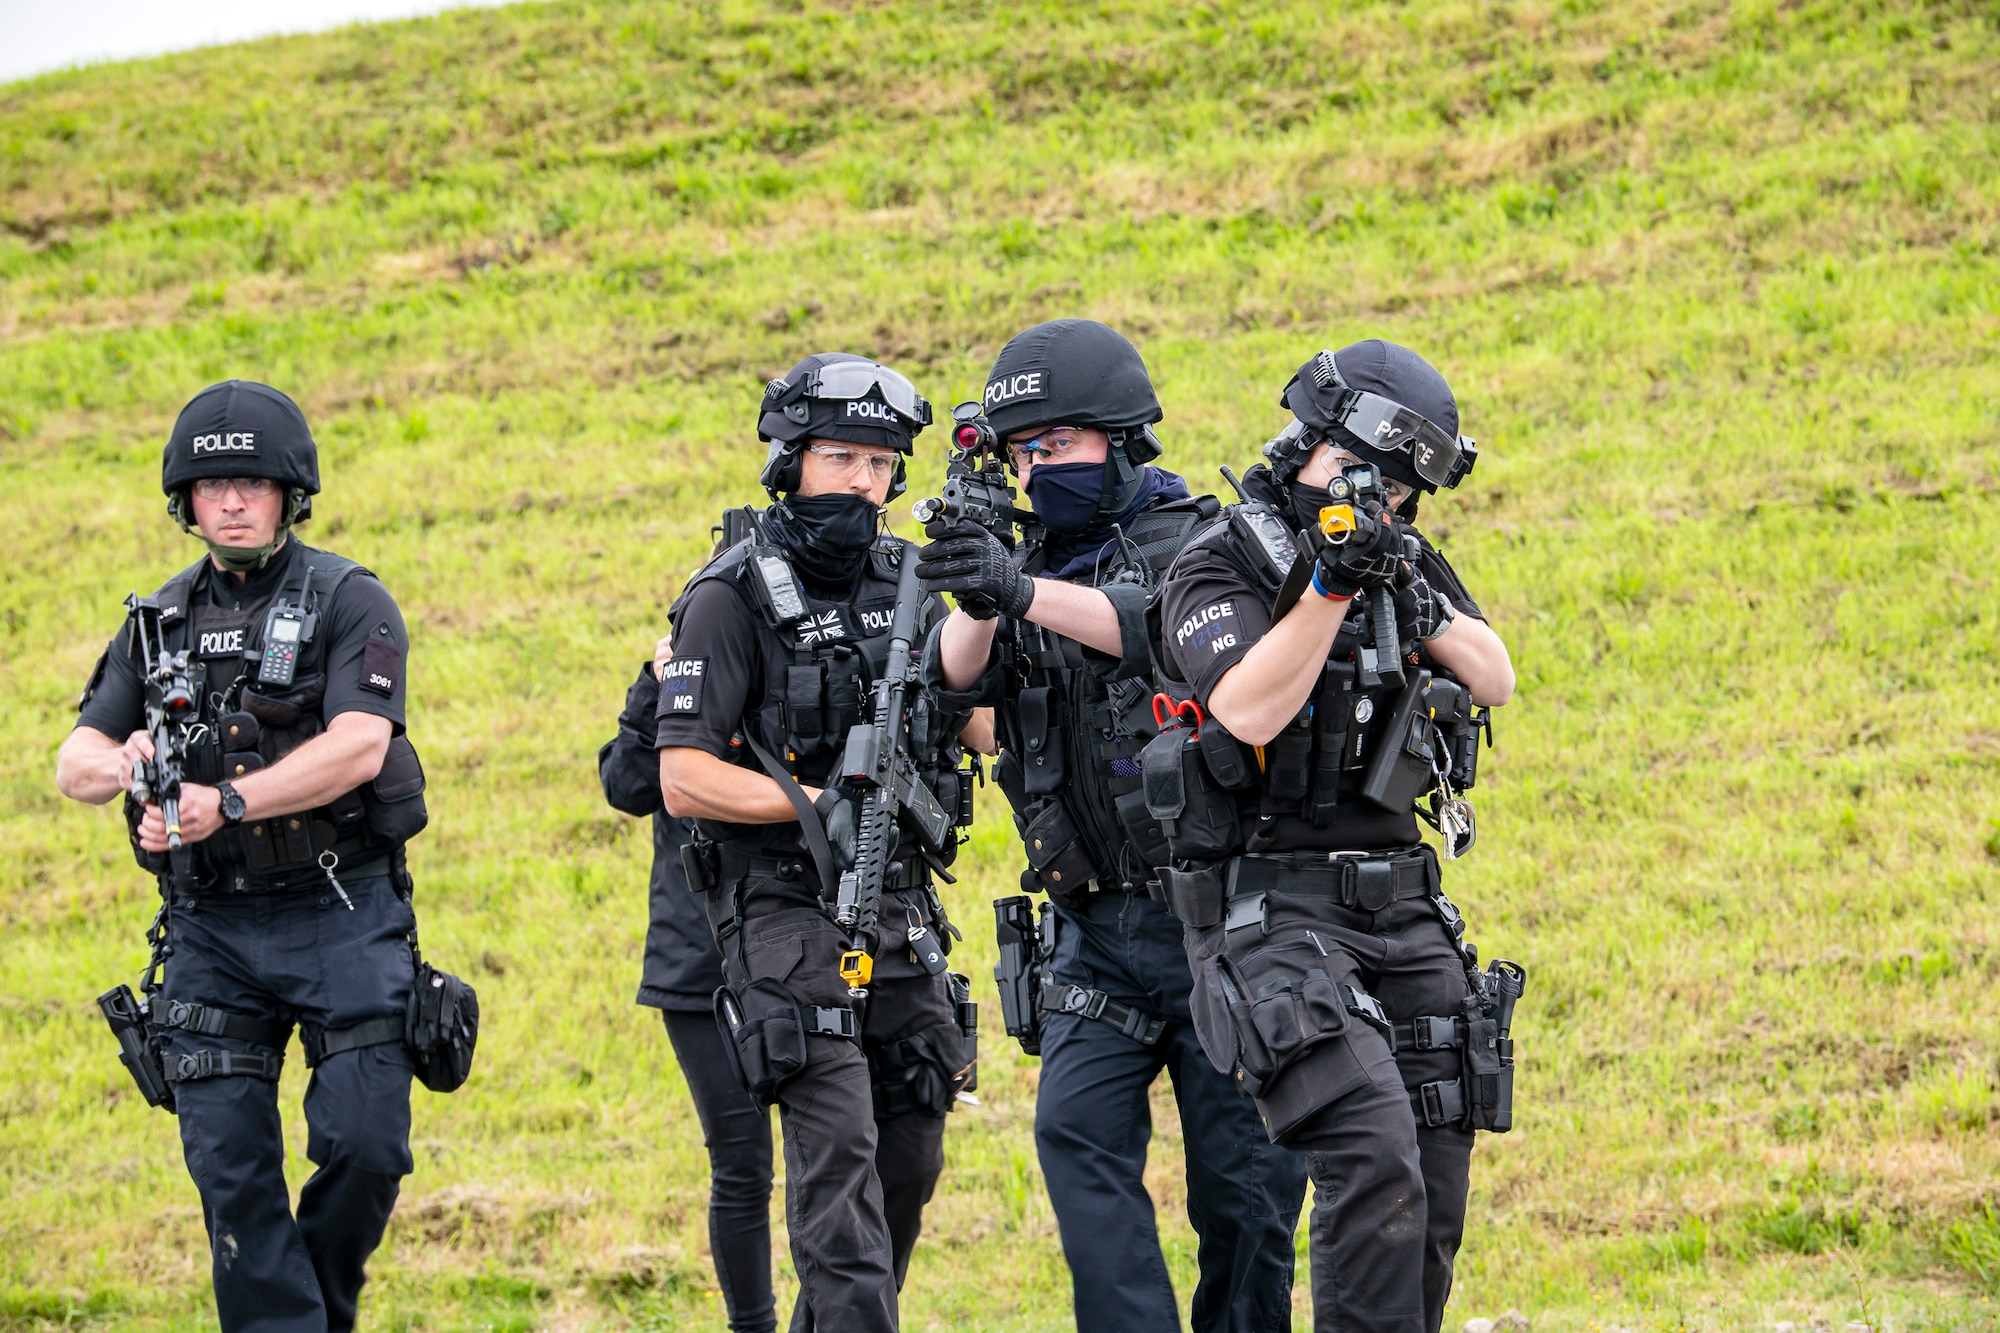 Police officers from the Northamptonshire Police Department advance their position during a tri-agency active shooter response exercise at RAF Croughton, England, June 30, 2021. Airmen from the 422nd Security Forces Squadron along with police officers from the NHPD and Ministry of Defense, participated in multiple exercises to enhance their search and seizure tactics, strengthen local ties and gain rapport with their fellow officers. (U.S. Air Force photo by Senior Airman Eugene Oliver)